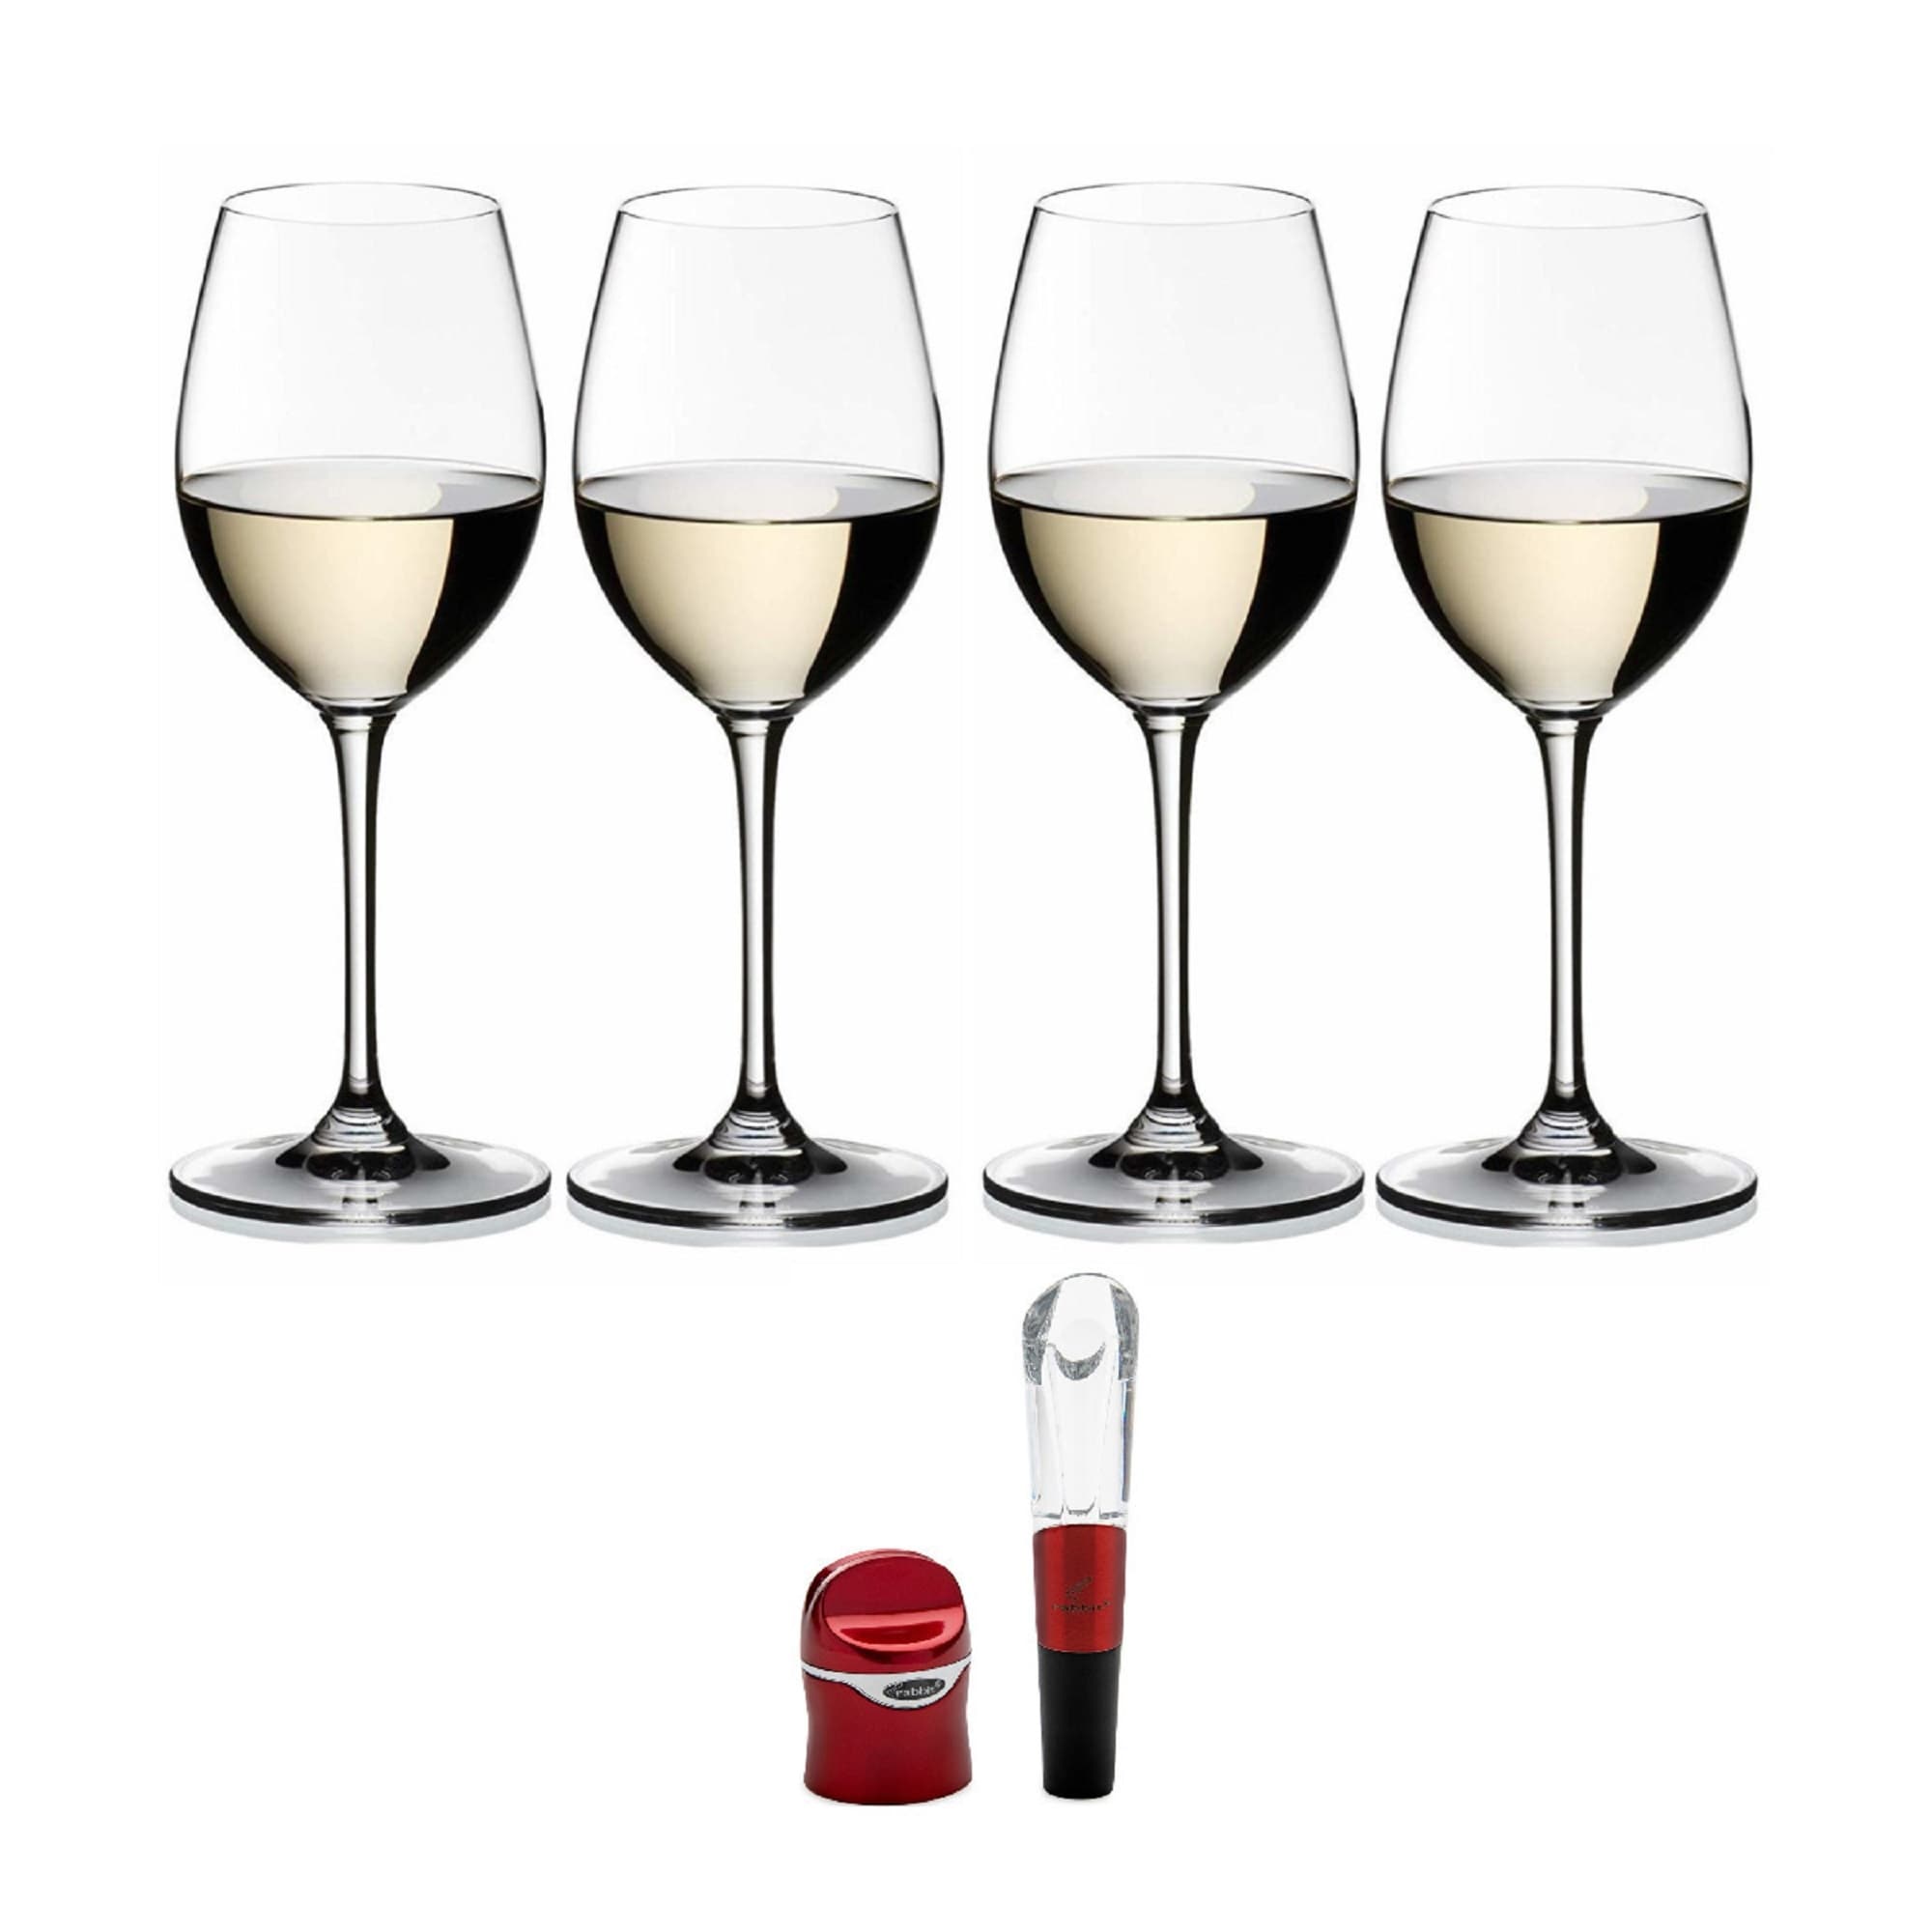 https://ak1.ostkcdn.com/images/products/is/images/direct/a48030d7749cf31ad9d9878131e176ca13957d23/Riedel-Vinum-Sauvignon-Blanc-Glasses-4-Pack-with-Sealer-%26-Aerator-Set.jpg